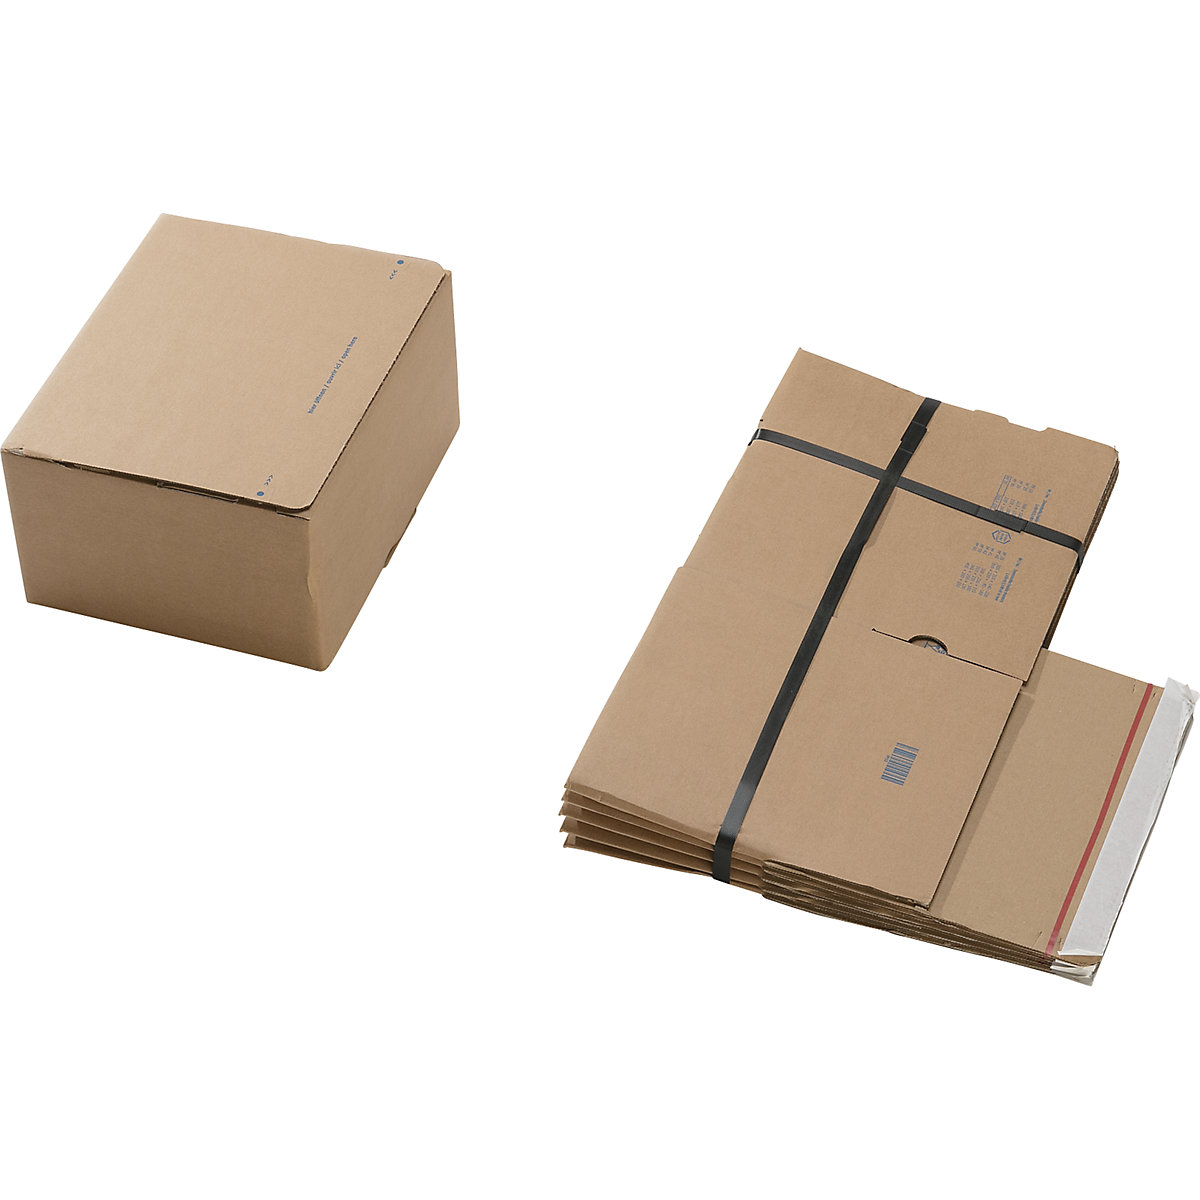 Dispatch cartons, with automatic base and self adhesive seal, internal dims. LxWxH 260 x 220 x 130 mm, pack of 100-4